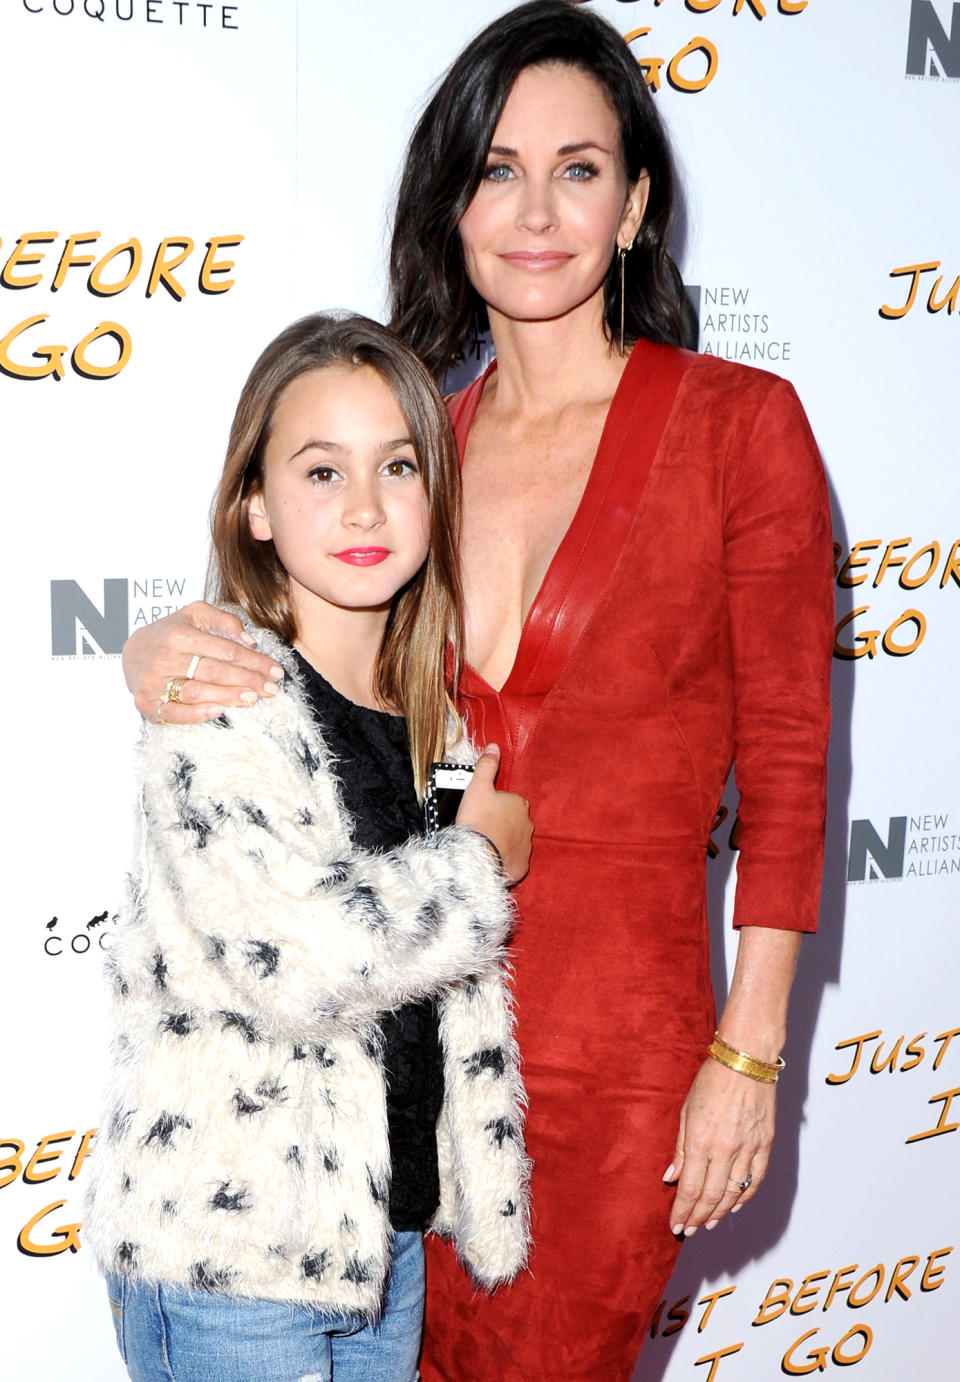 Every Time Courteney Cox and Coco Arquette's Mother-Daughter Bond Melted Our Hearts